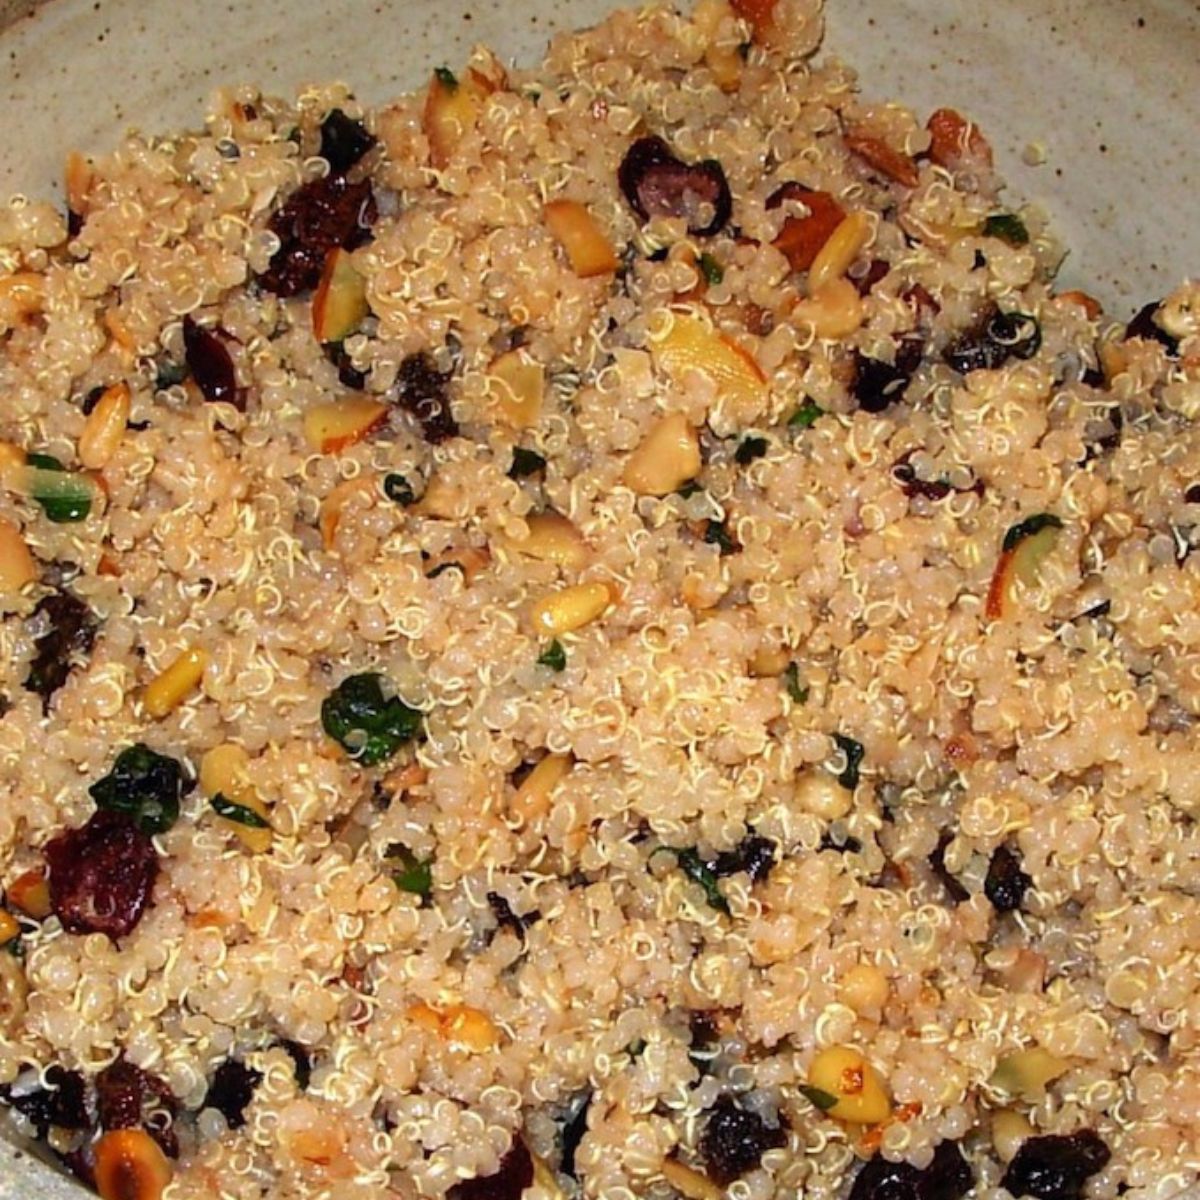 Quinoa salad with fruits and nuts